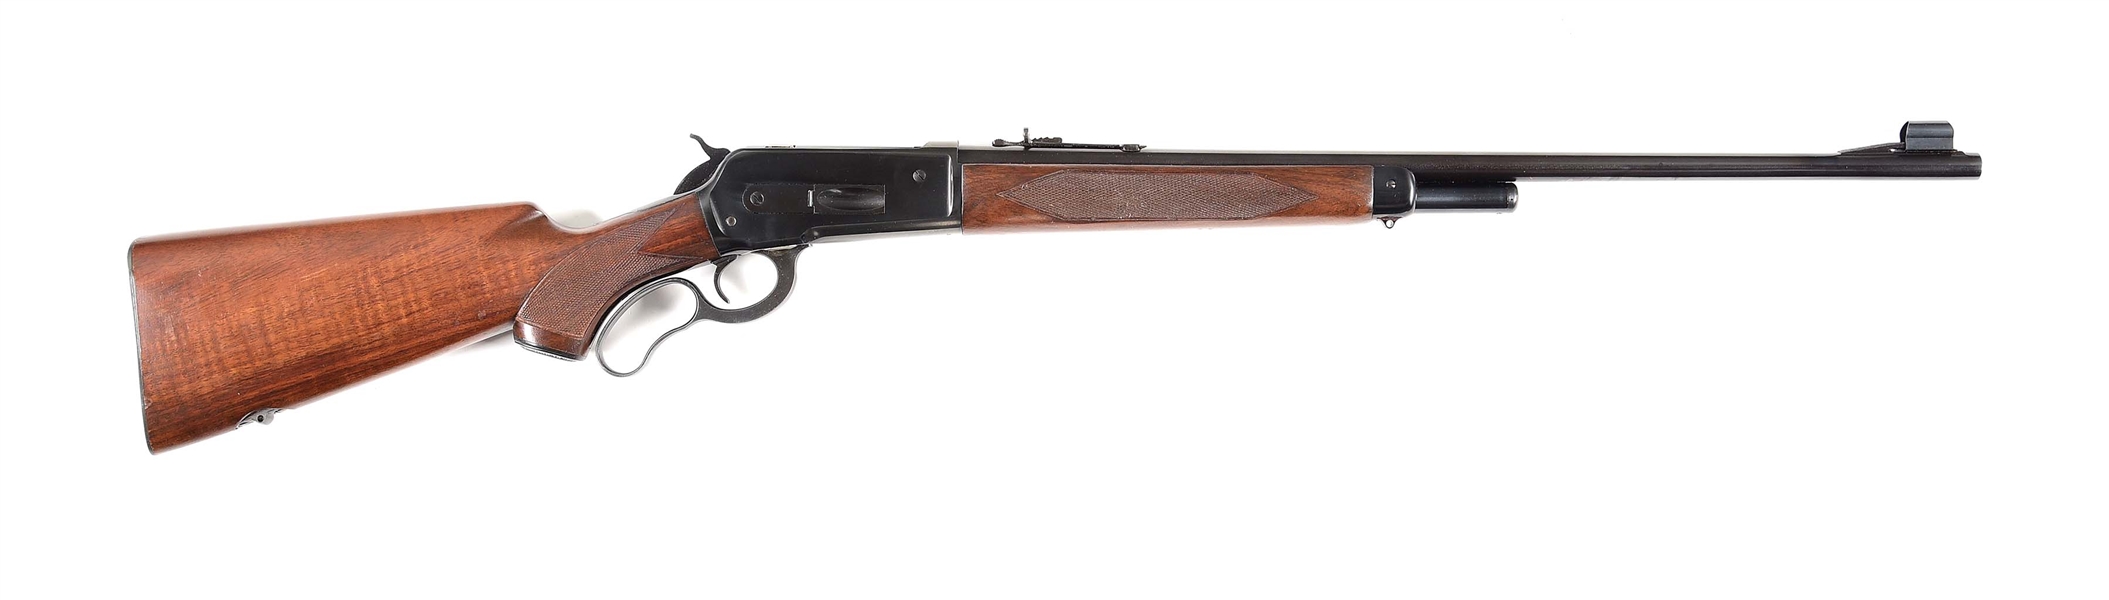 (C) RESTORED WINCHESTER MODEL 71 DELUXE LEVER ACTION RIFLE.